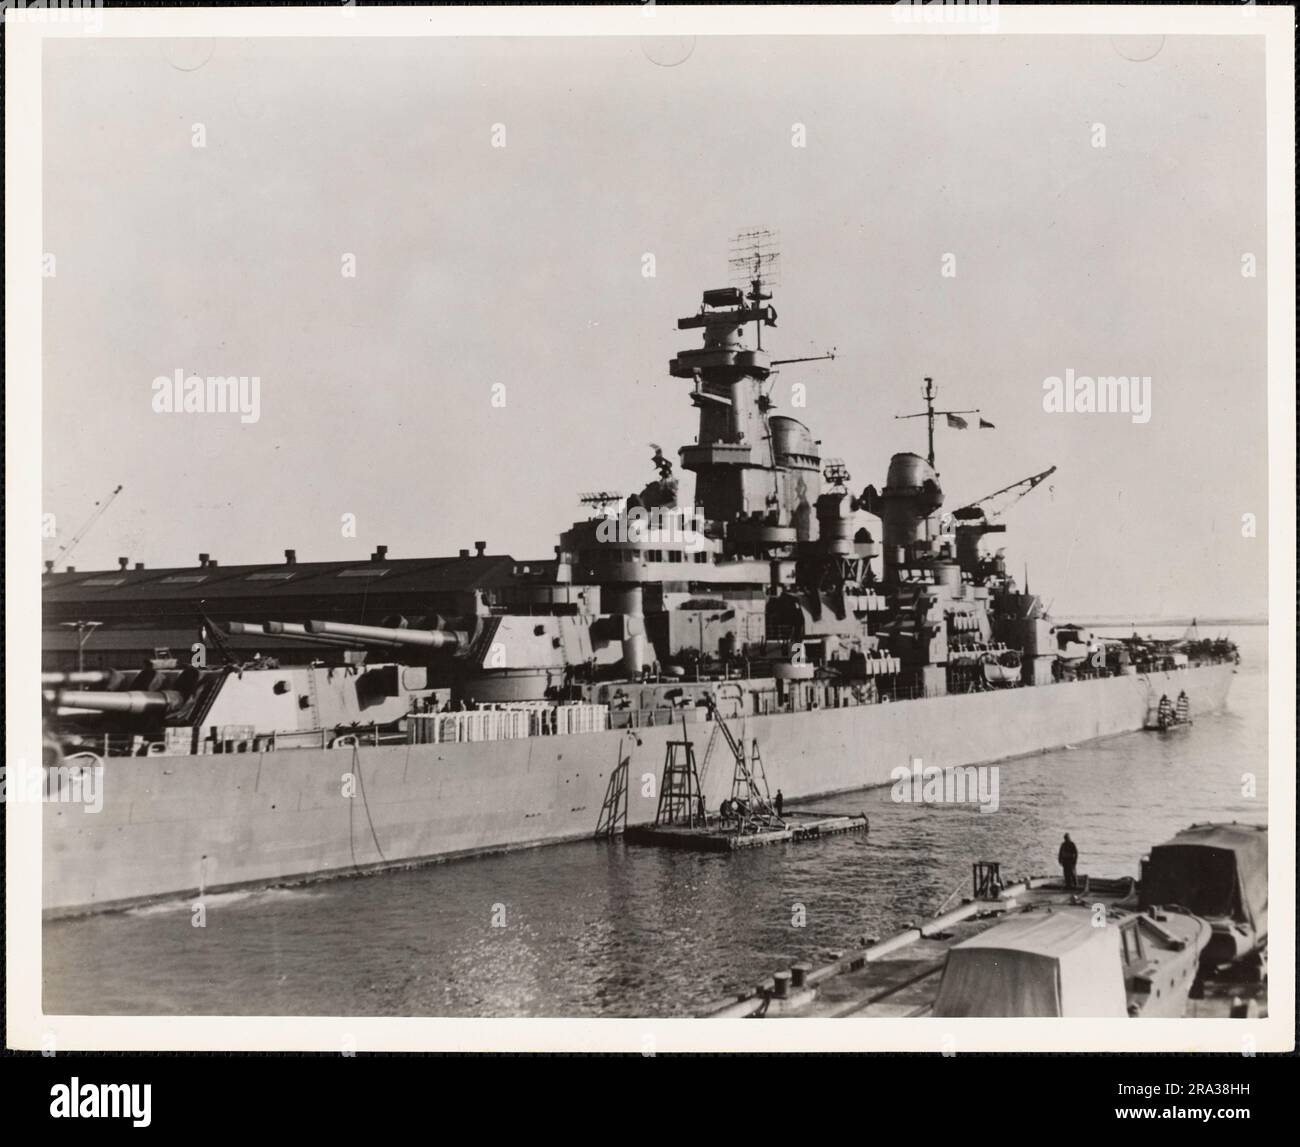 Iowa-Class Battleship USS New Jersey (BB-62) Overhauled at the U.S. Naval Dry Dock. Administrative History of the First Naval District in World War II Stock Photo